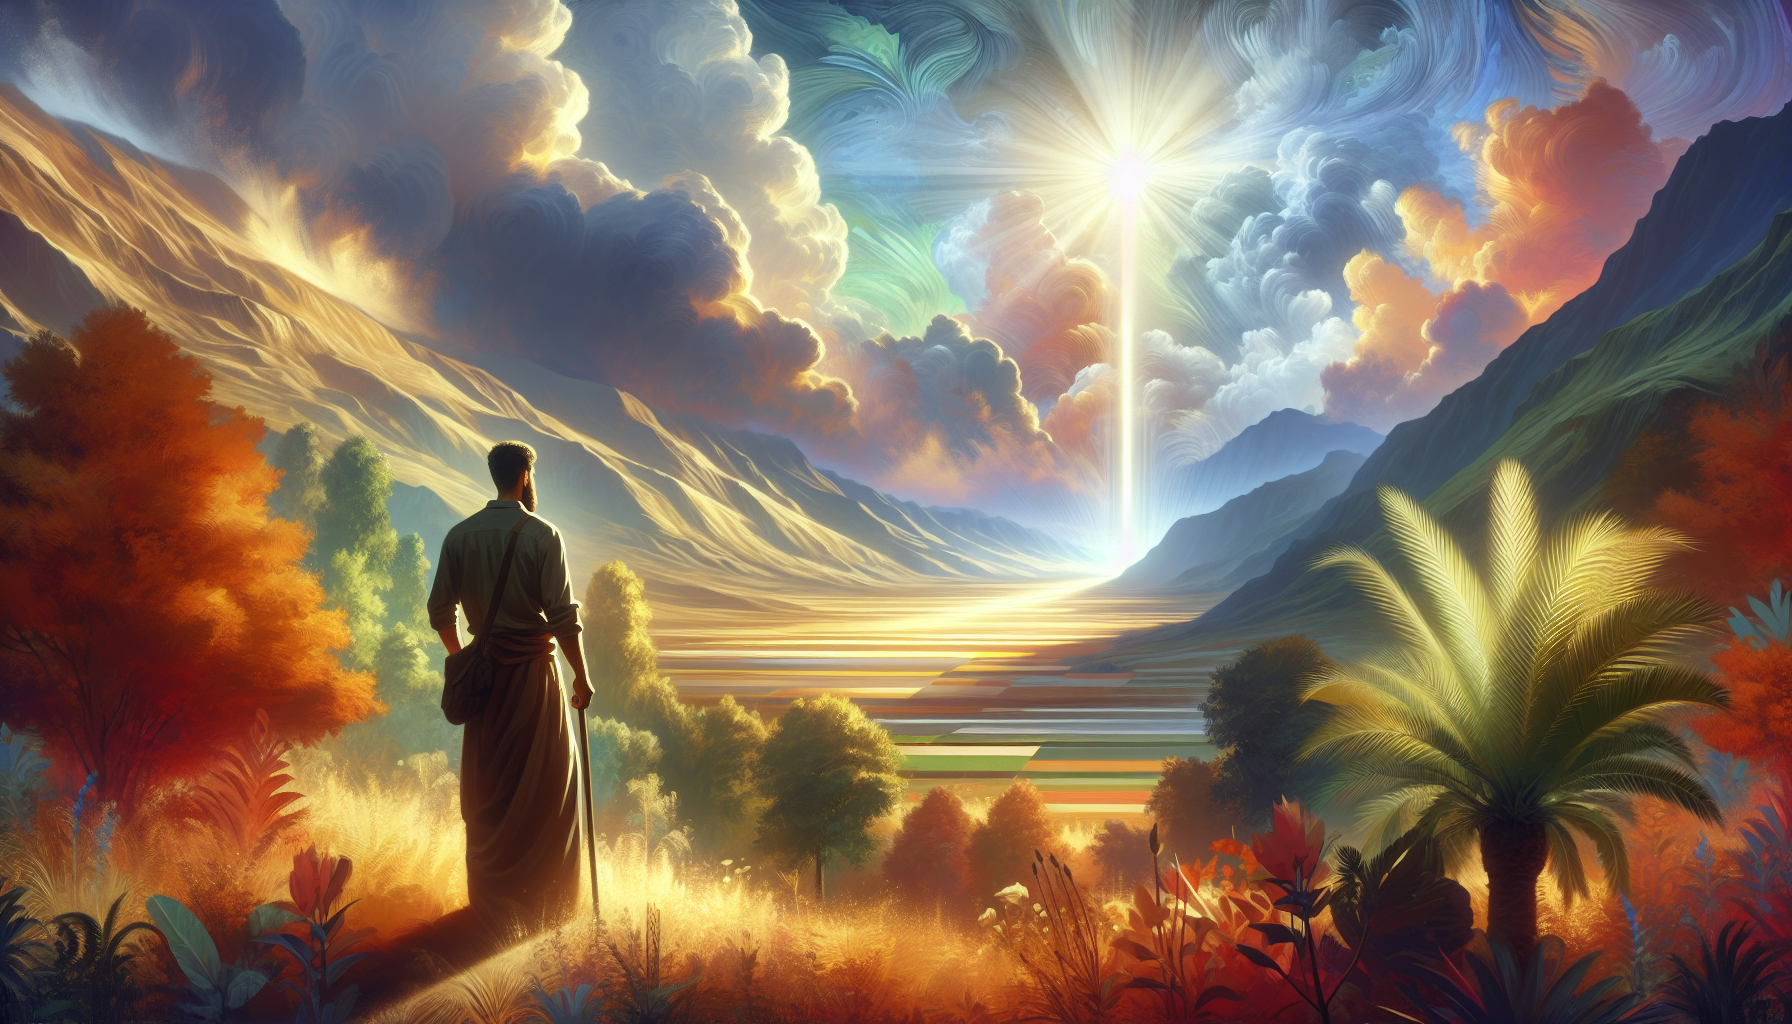 Visual interpretation of Psalm 27:13, depicting a serene and hopeful landscape scene with a person standing confidently, gazing at a beam of light breaking through clouds over a lush valley.